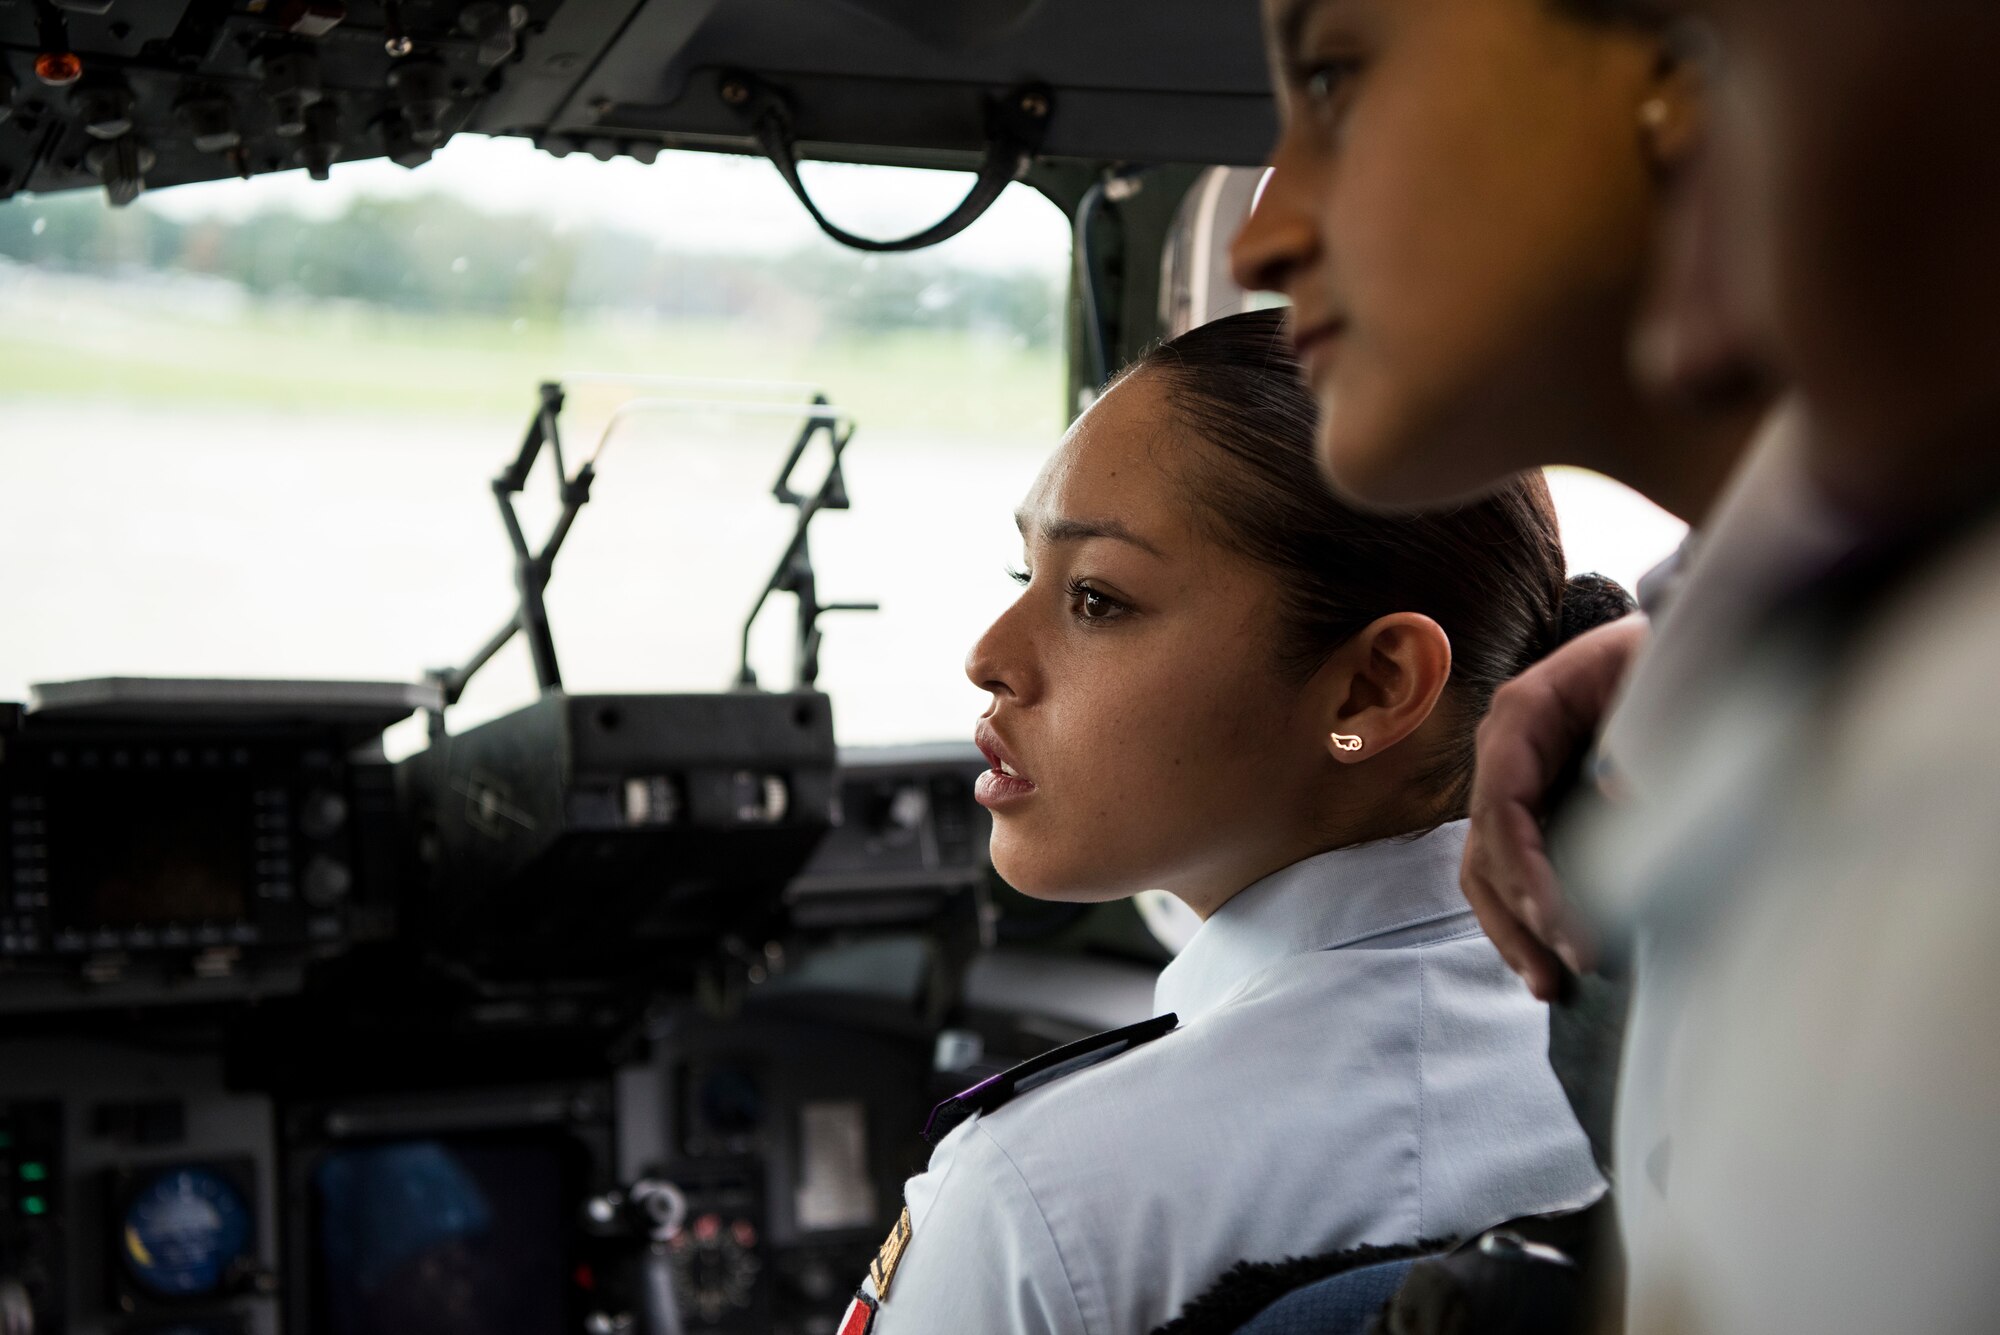 22 cadets from 11 different Latin American countries were brought to the United States to get hands-on experience with the different branches of the U.S. military.